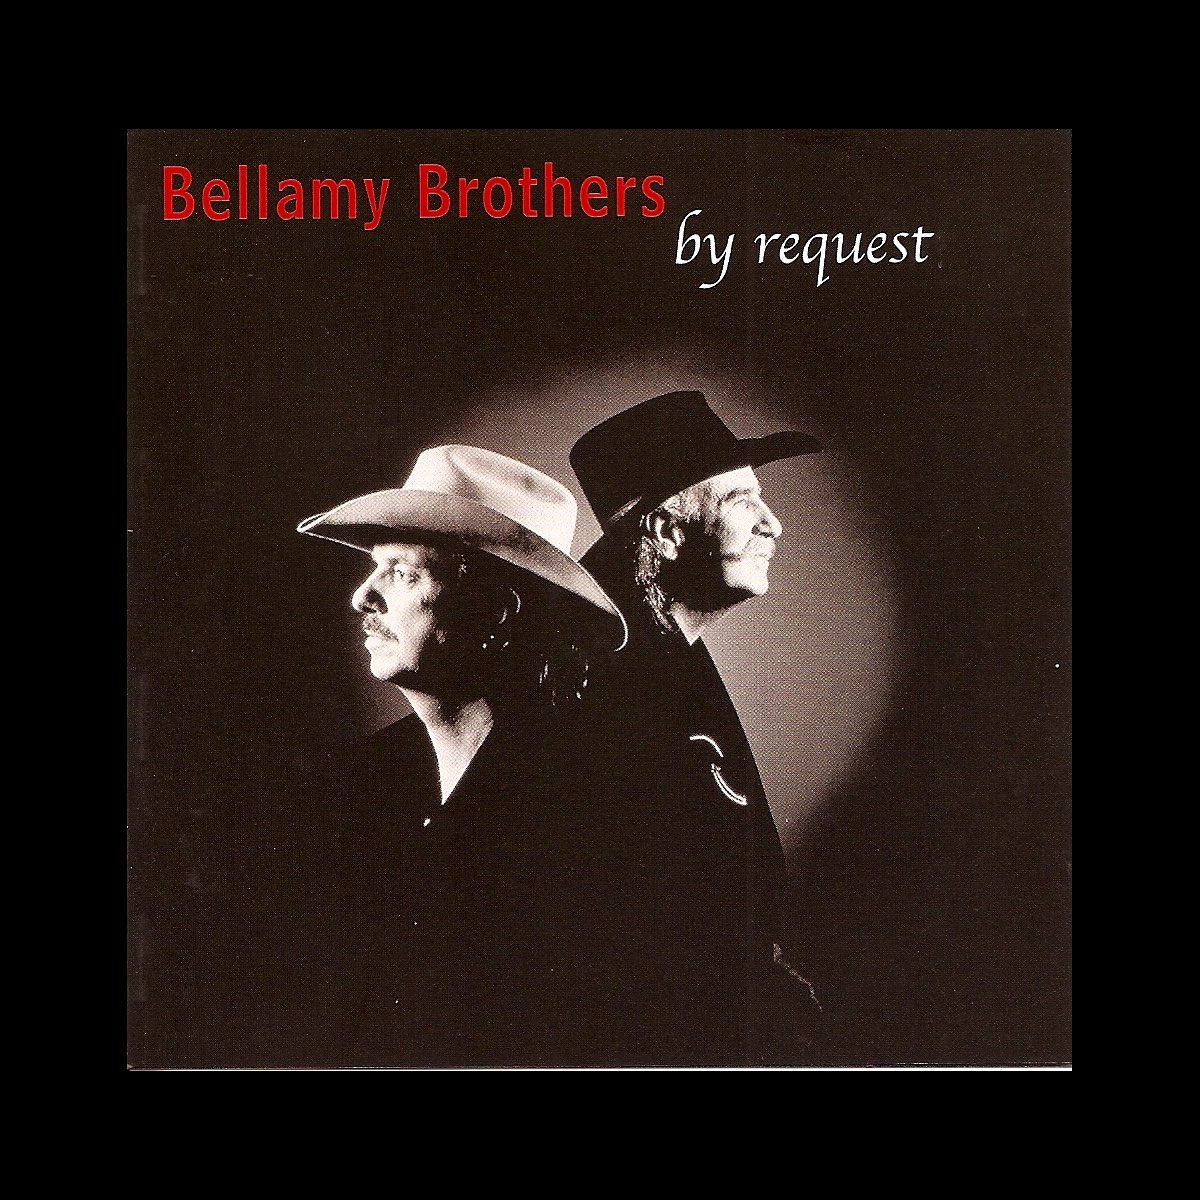 Brothers дискография. Bellamy brothers CD. The Bellamy brothers. Bellamy brothers Beggars and Heroes. Bellamy brothers you'll never be sorry.